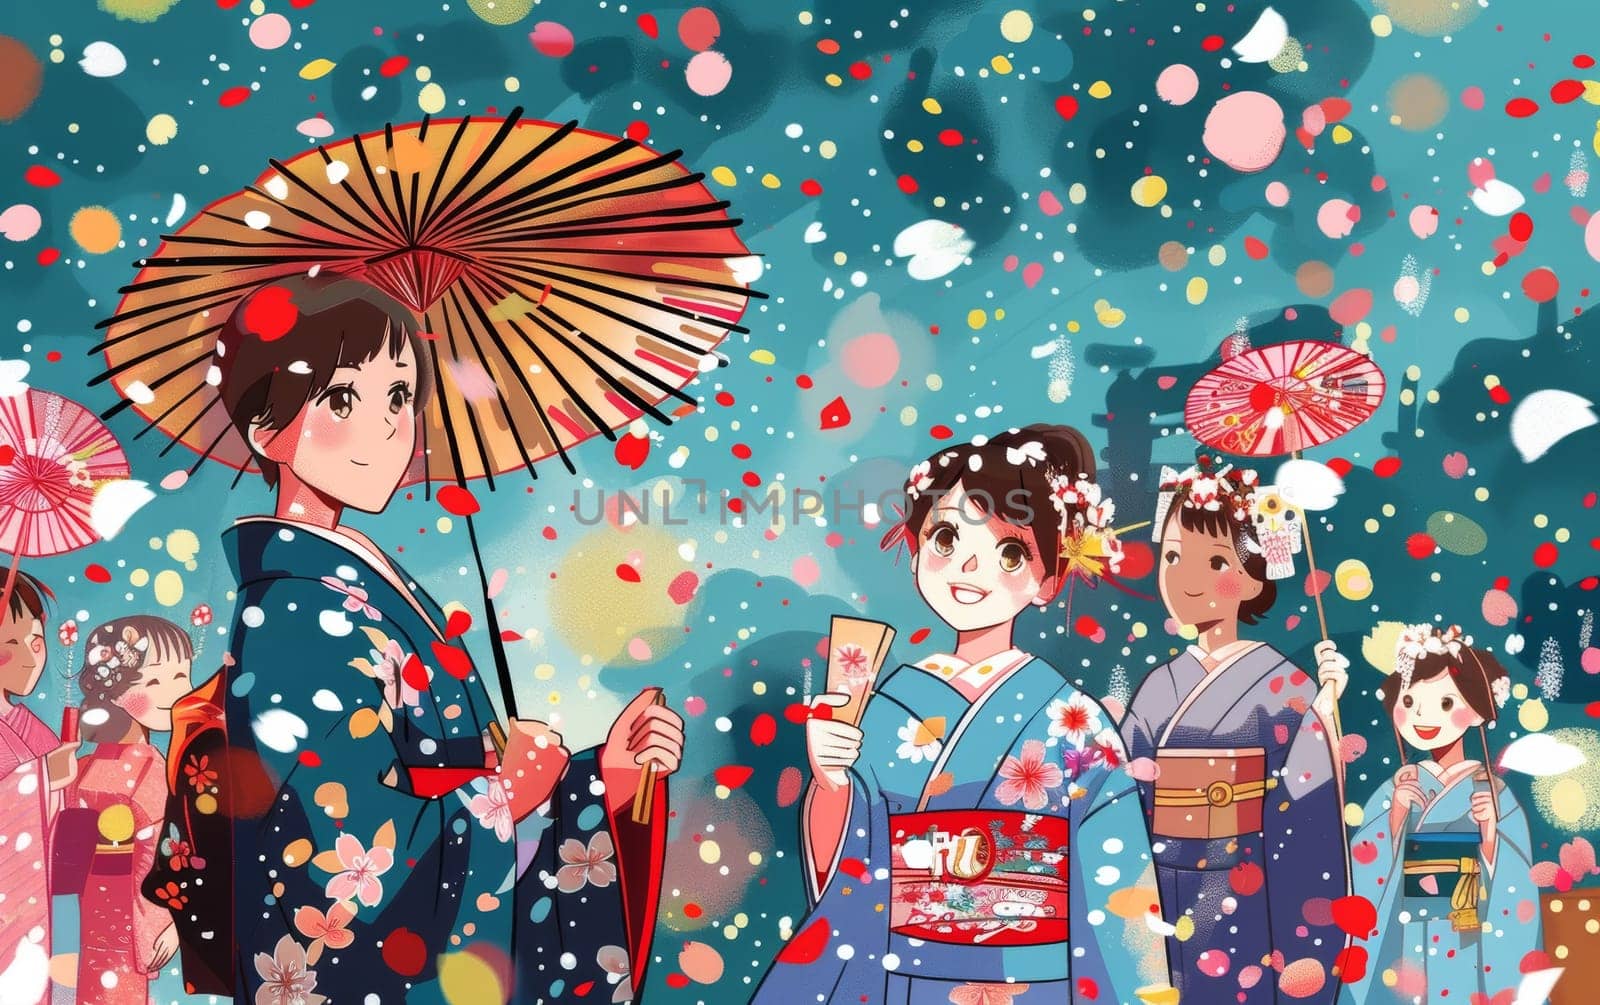 Crowds of joyful people in colorful traditional Japanese attire celebrate the Hanami festival, surrounded by a whimsical display of falling petals and fireworks